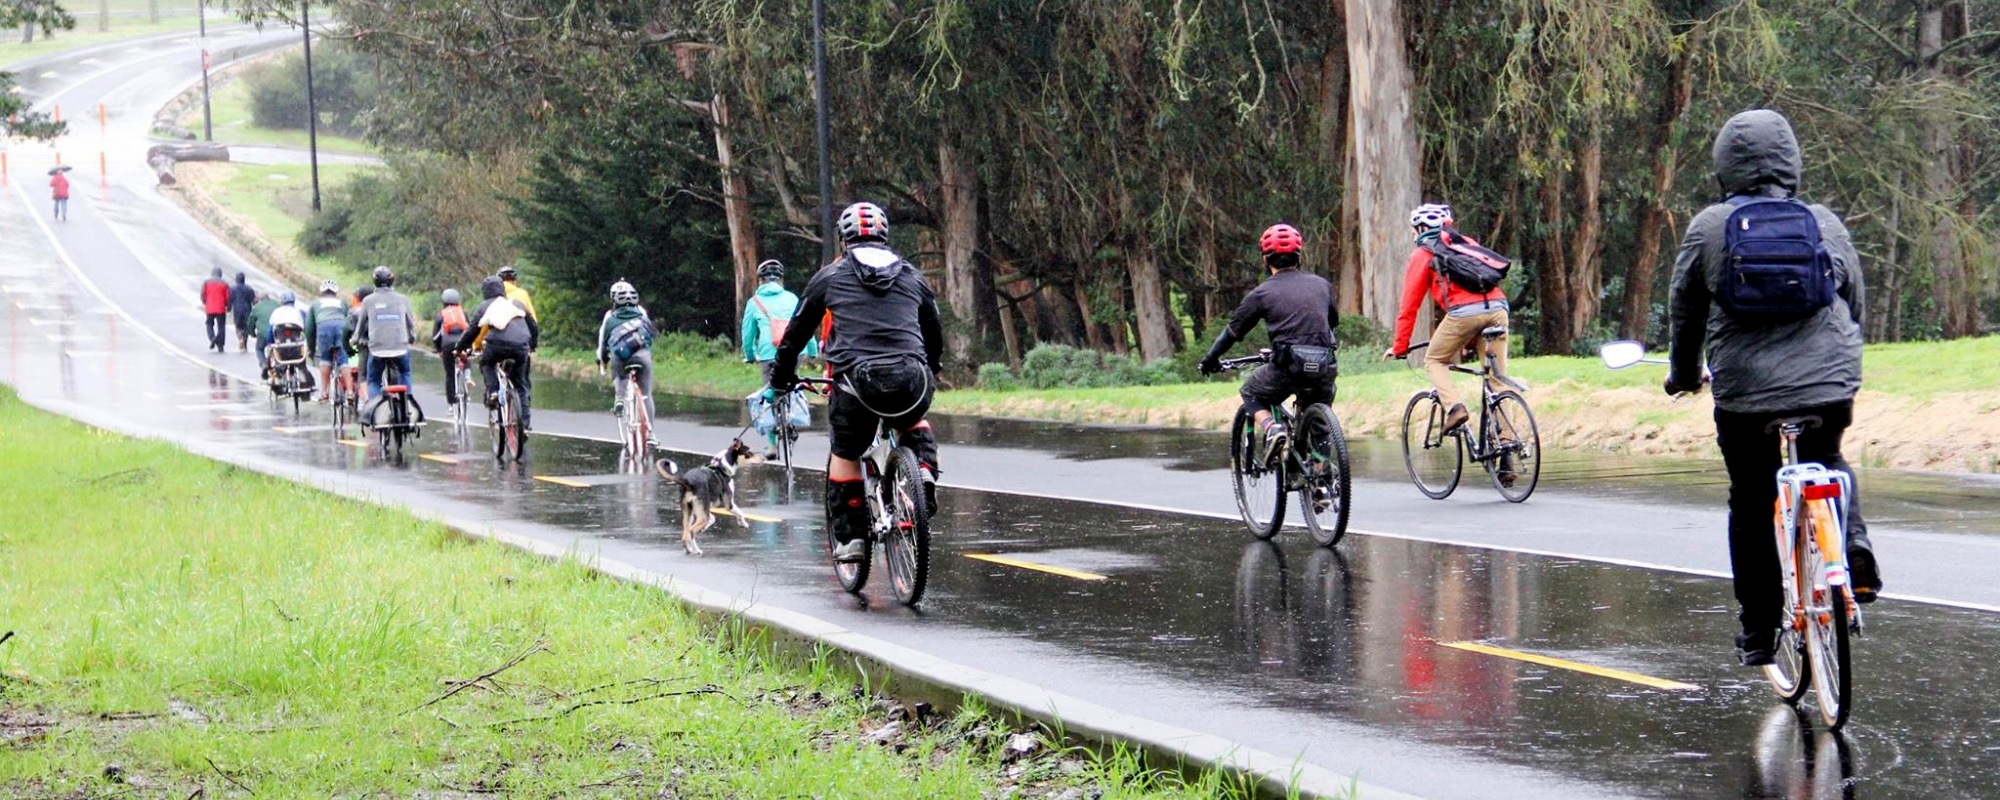 bikers on a rainy day on Mansell